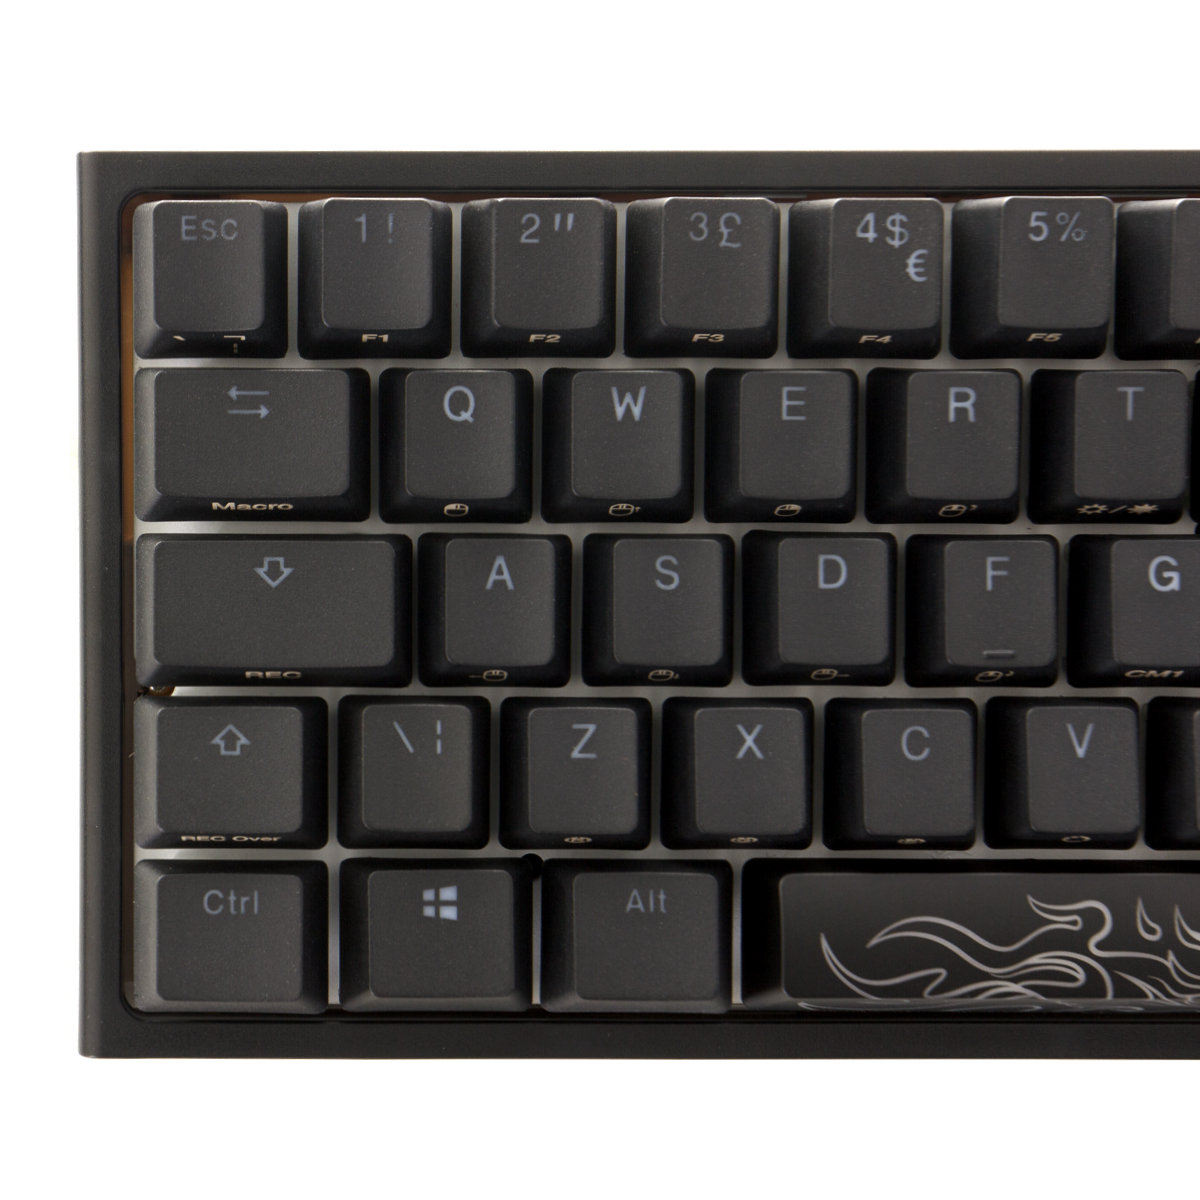 Ducky - Ducky One 2 Pro Mini 60% Mechanical Gaming Keyboard Black MX Cherry Red Switch - UK Layout